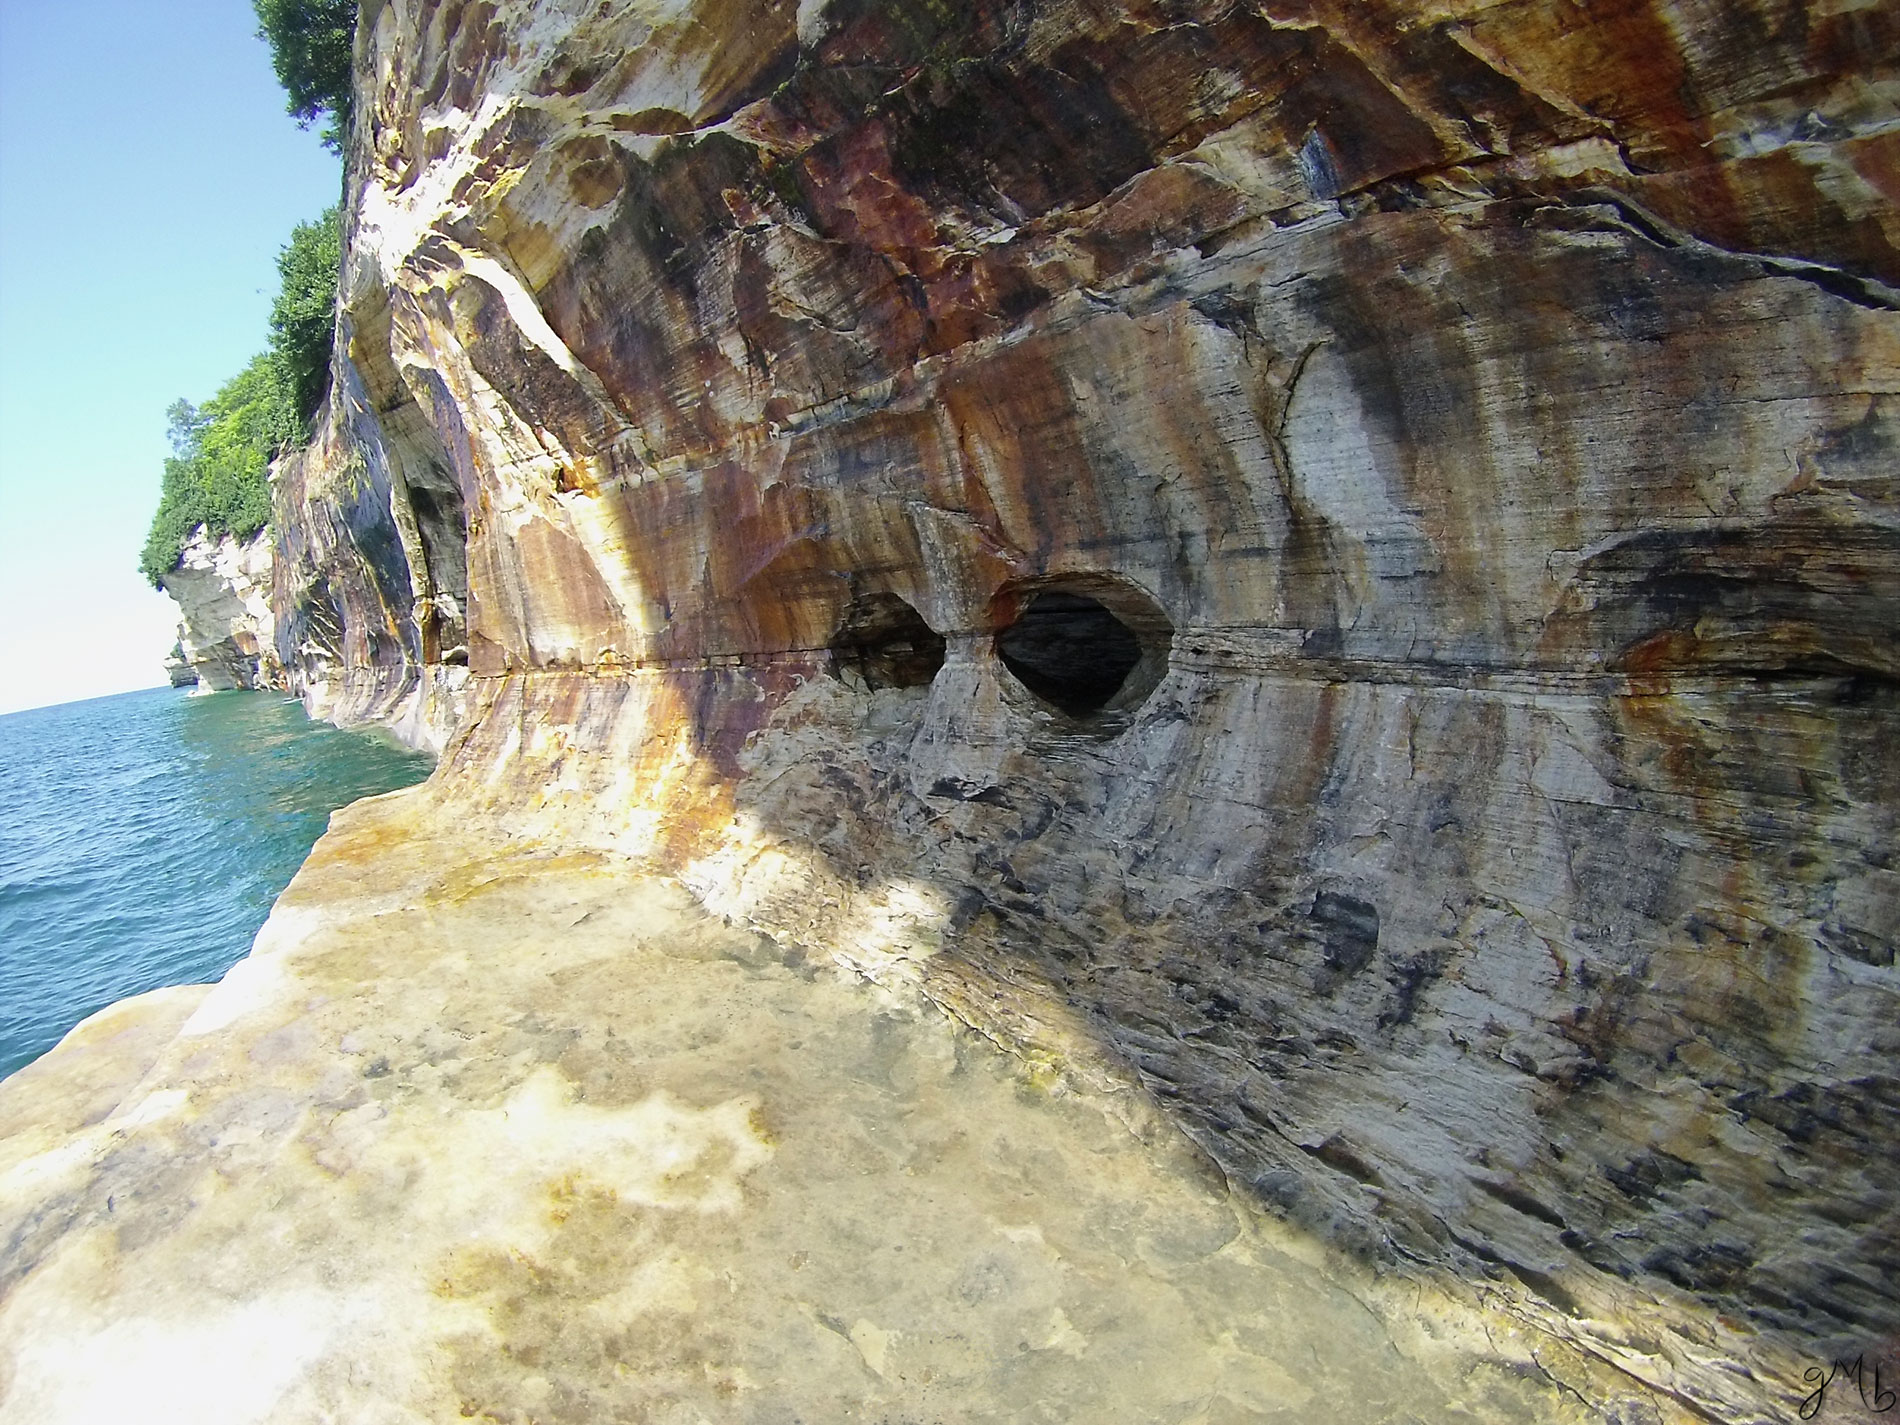 Face in the rock.